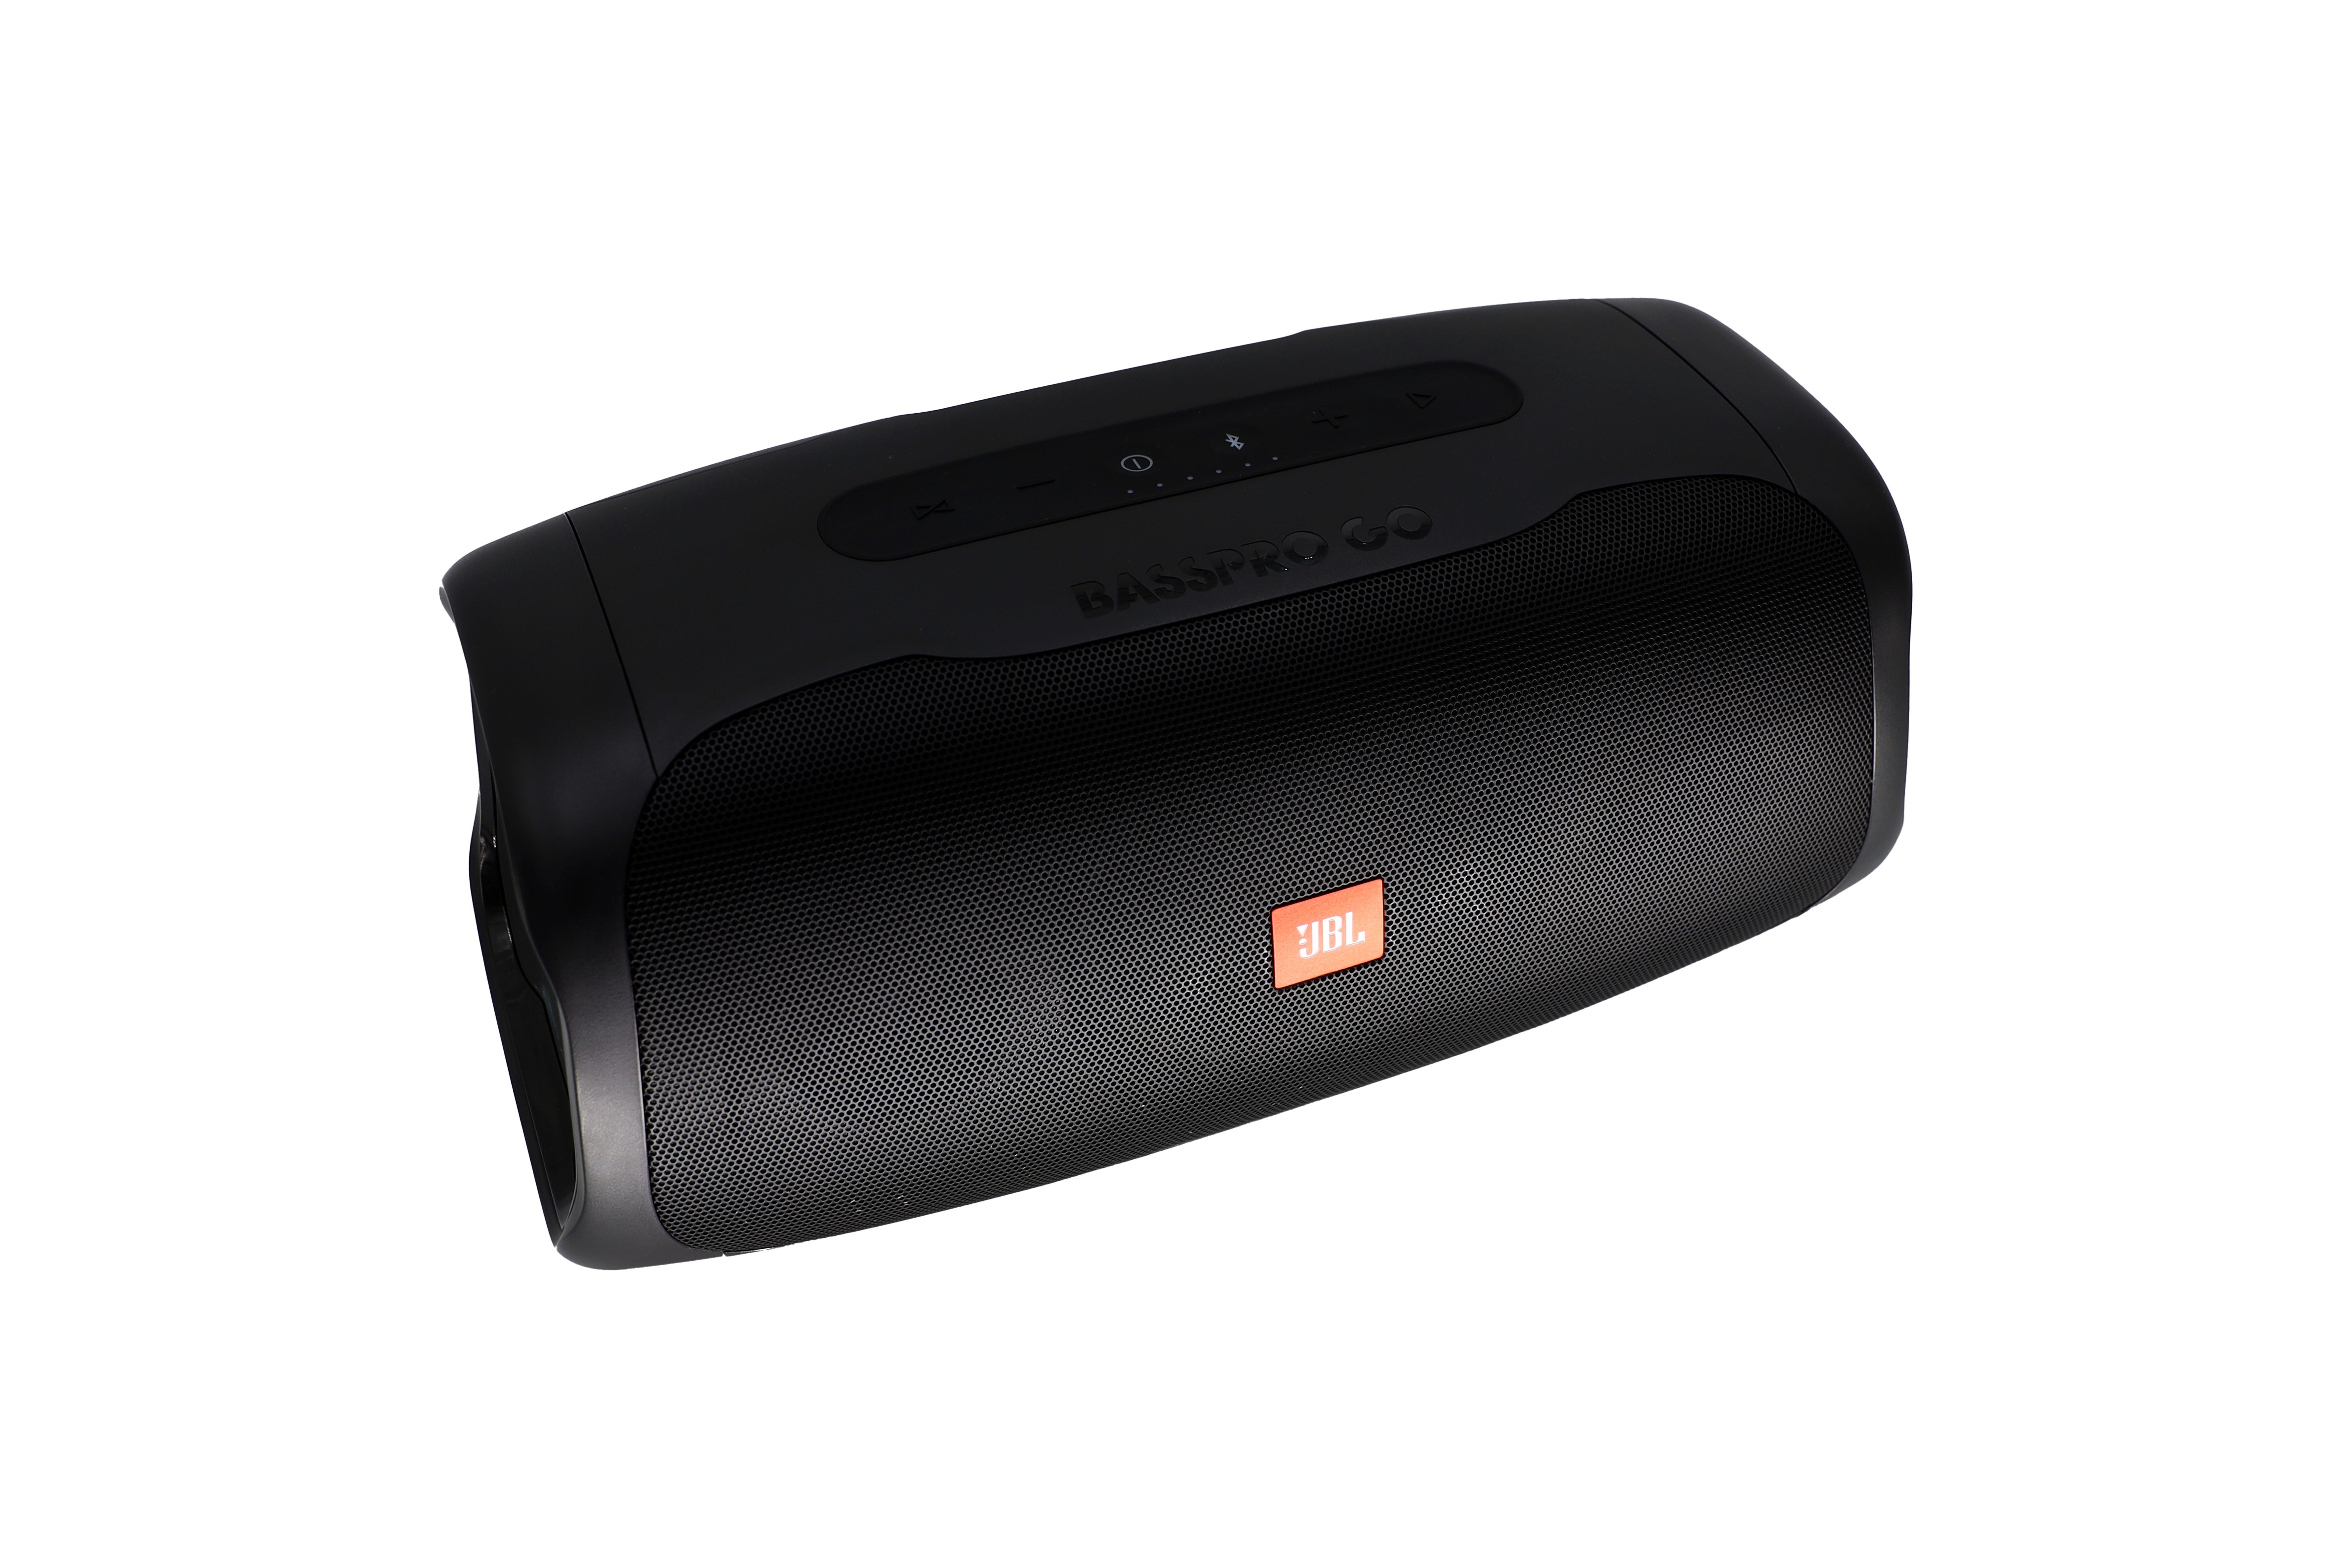 Rent JBL Partybox 310 Party Bluetooth Speaker from €24.90 per month